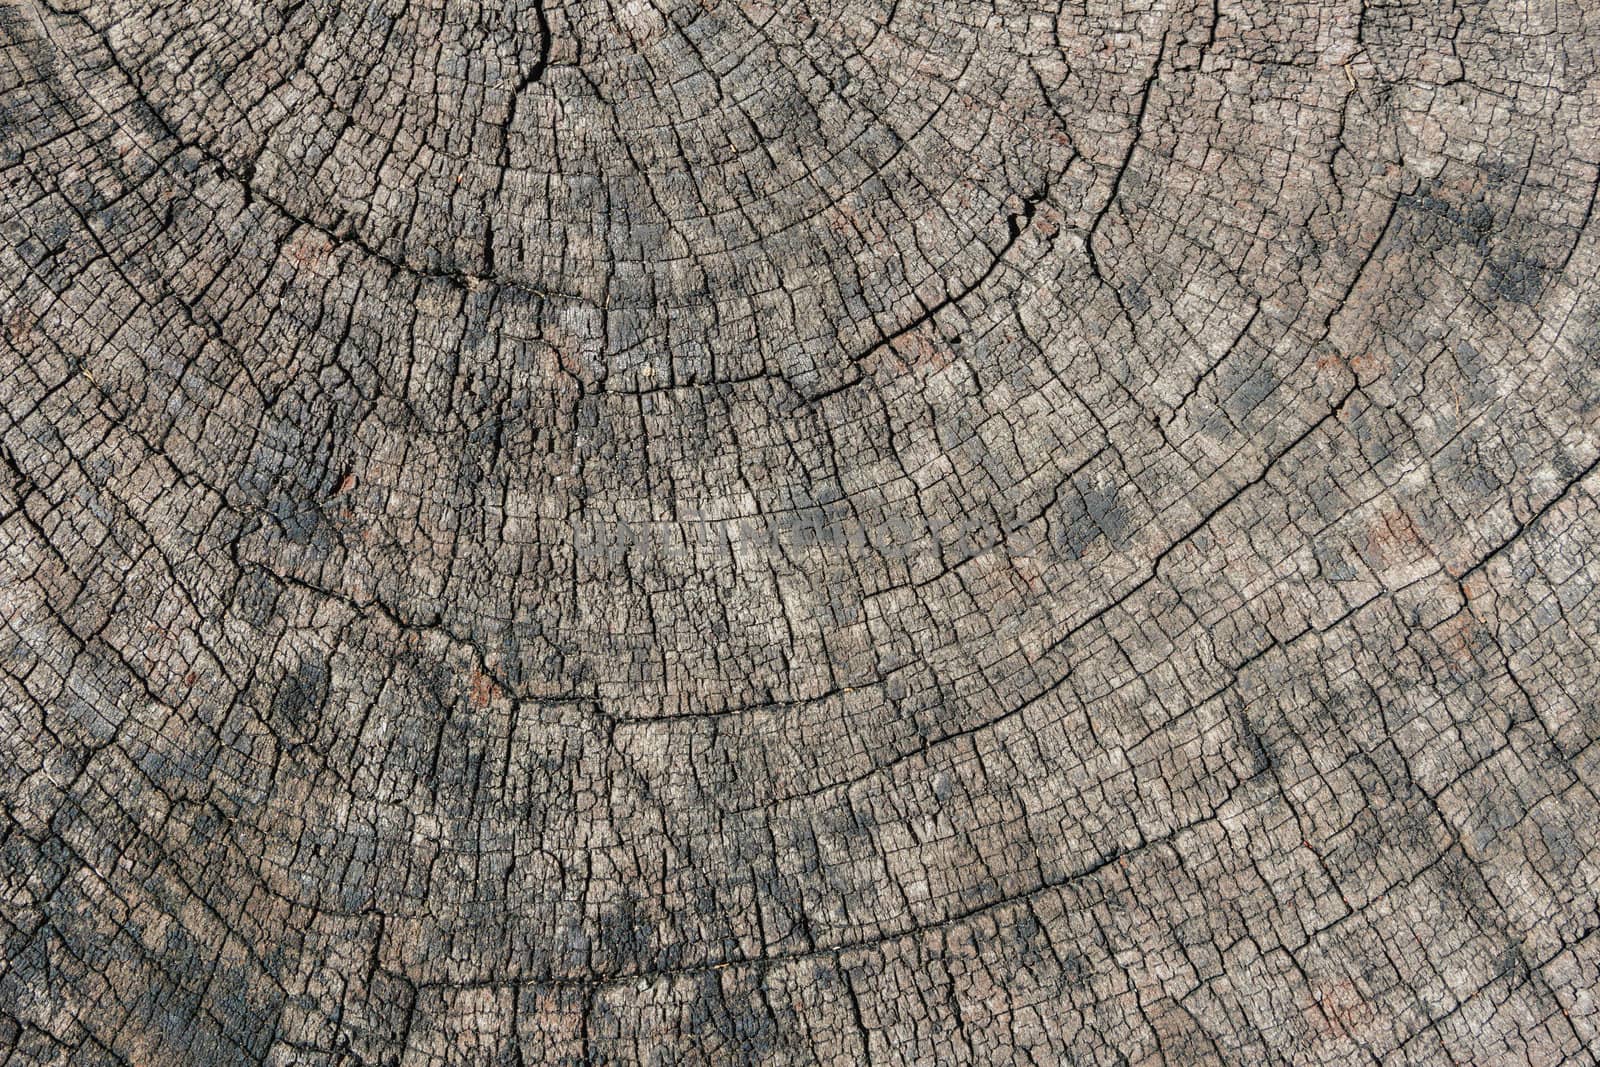 Texture of Old Cut Down Tree by punpleng